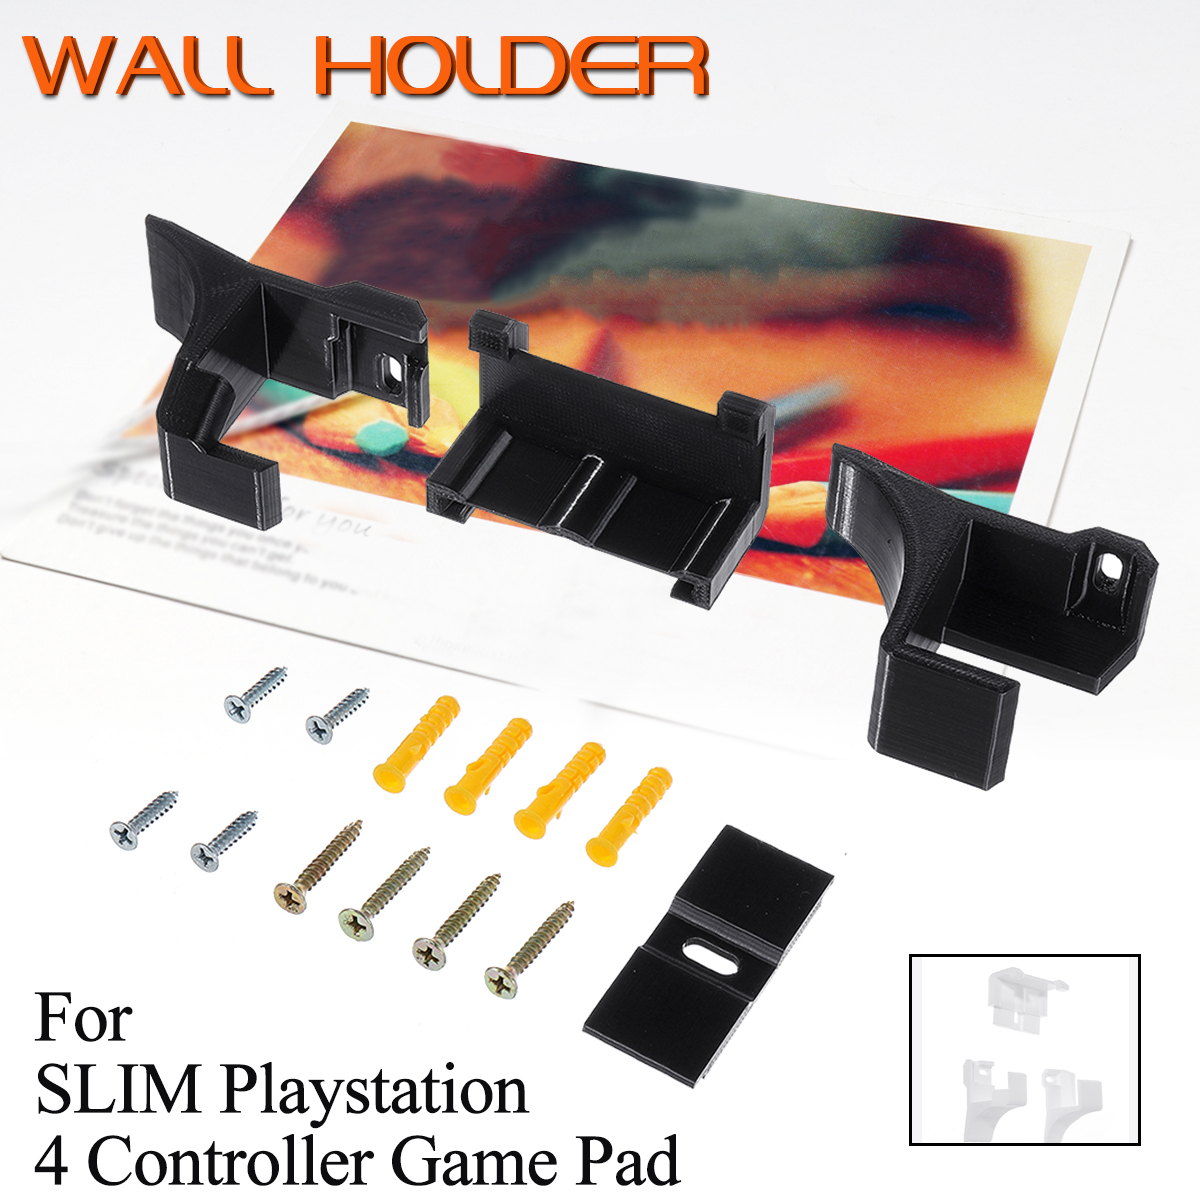 Wall Mount Bracket for Sony Playstation PS4 Pro Slim Console Stand Holder Handheld Stabilizer Bracket 21